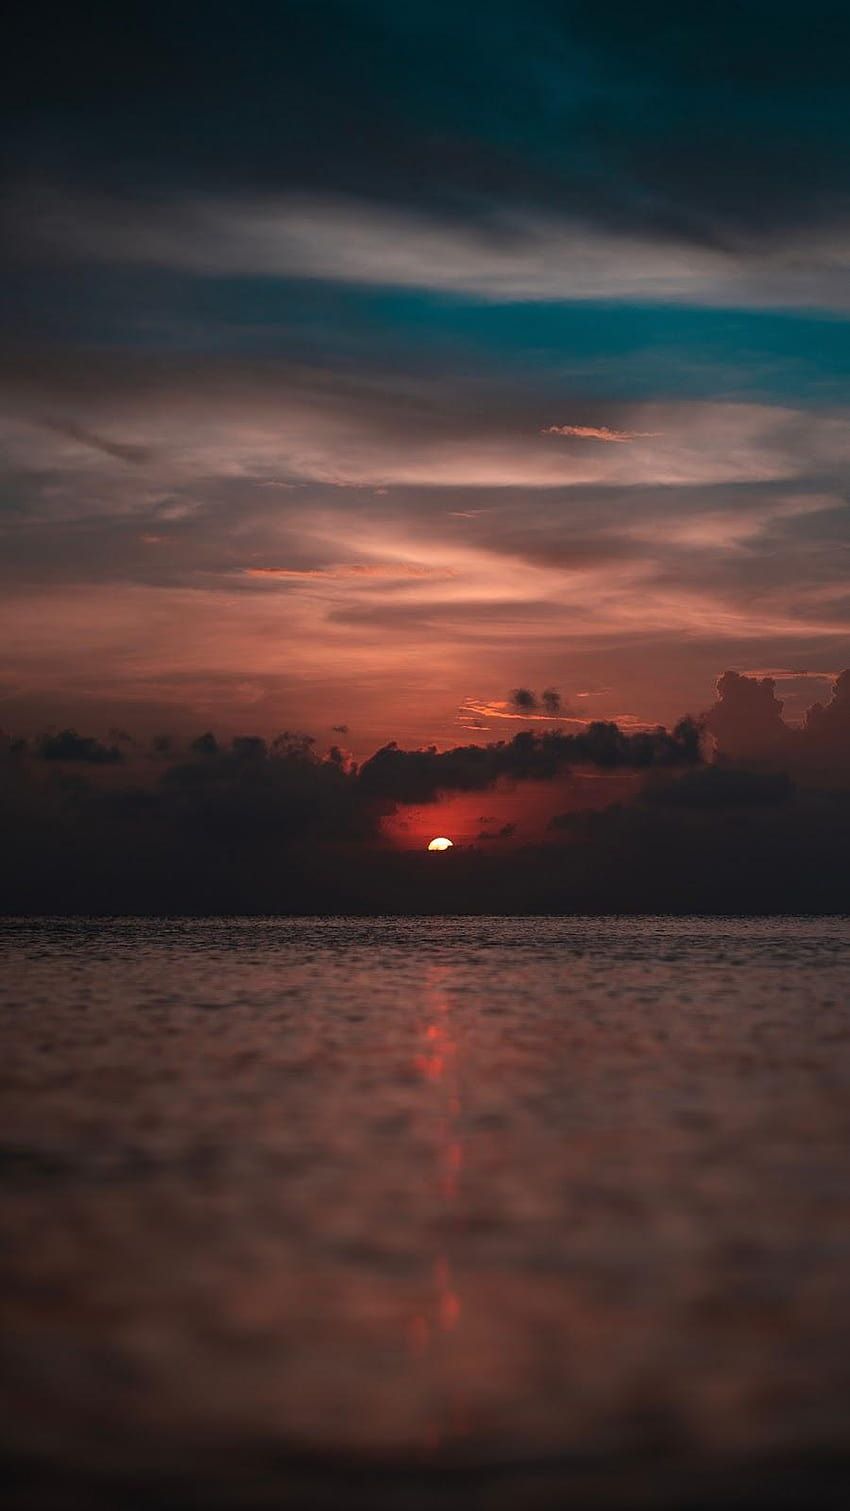 A photo of the sun setting over the ocean - Lake